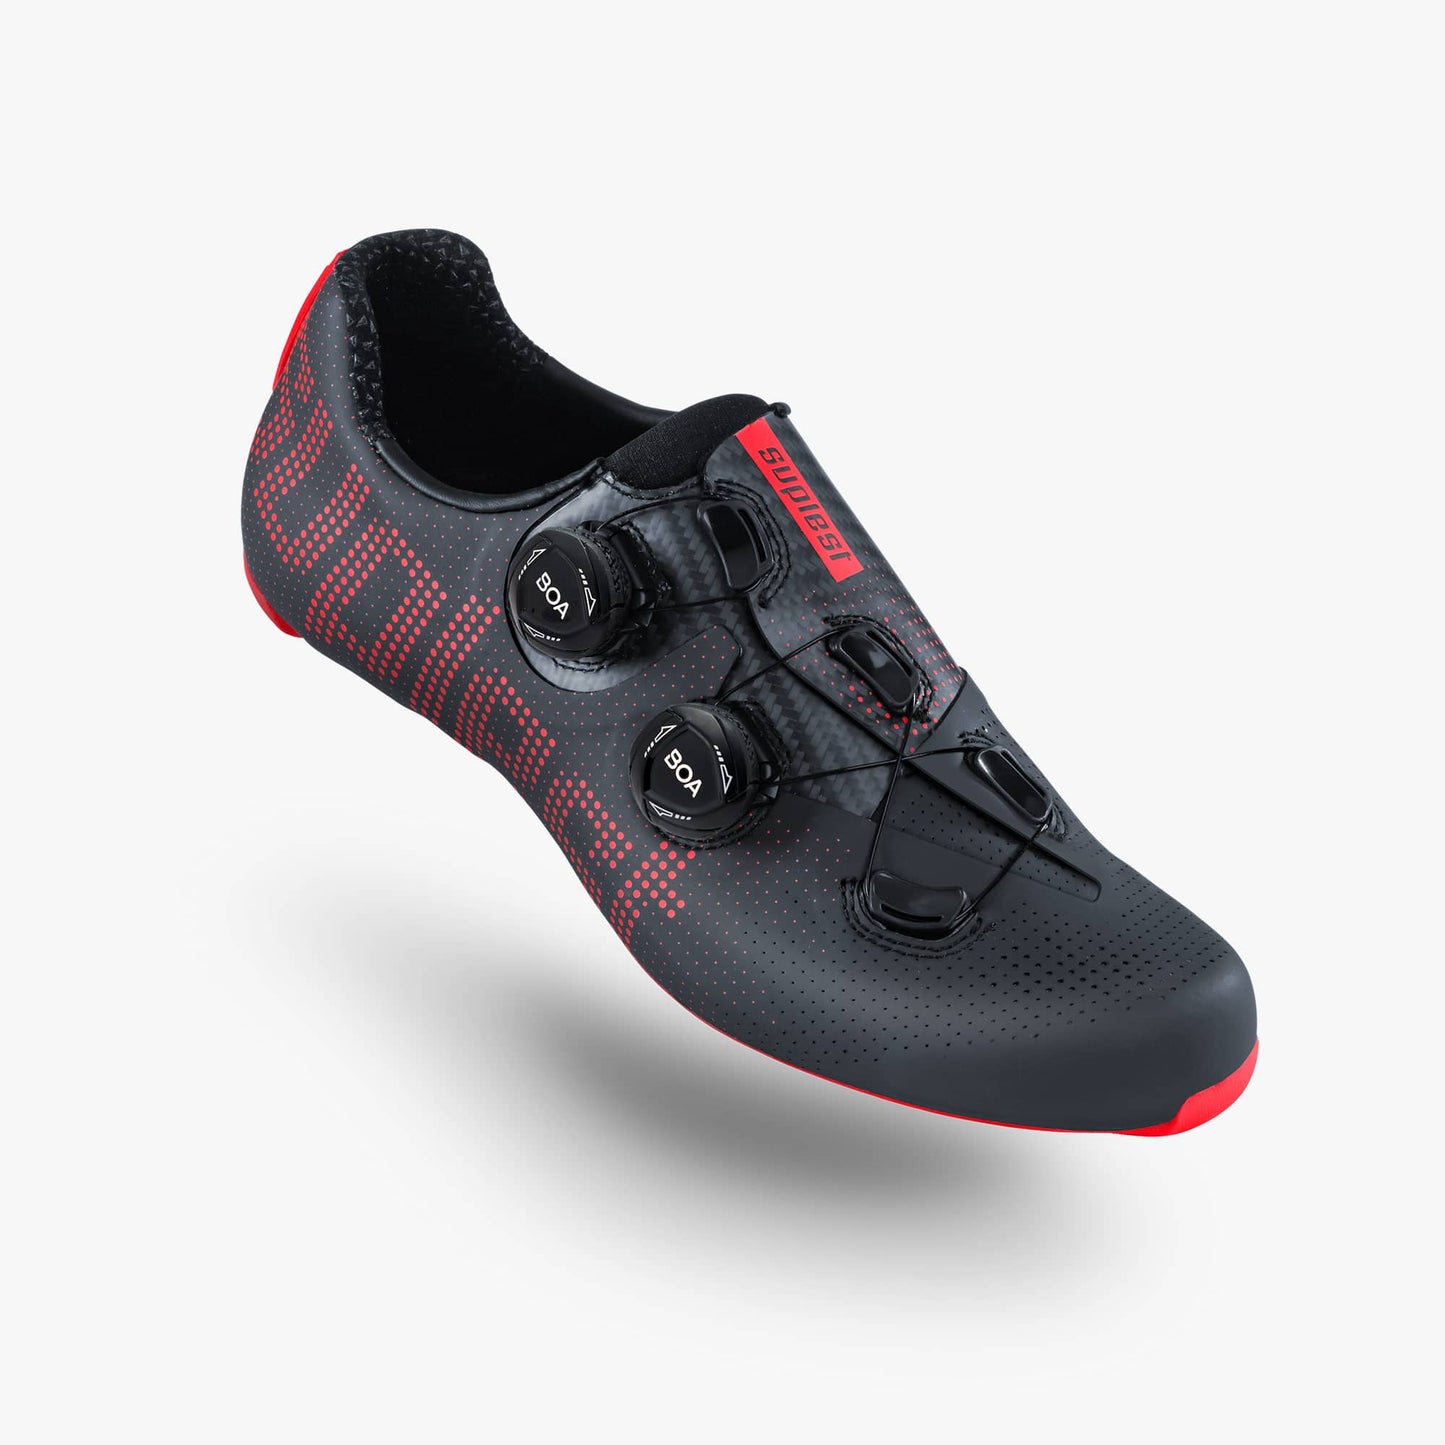 Chaussures Suplest EDGE+ Route Pro